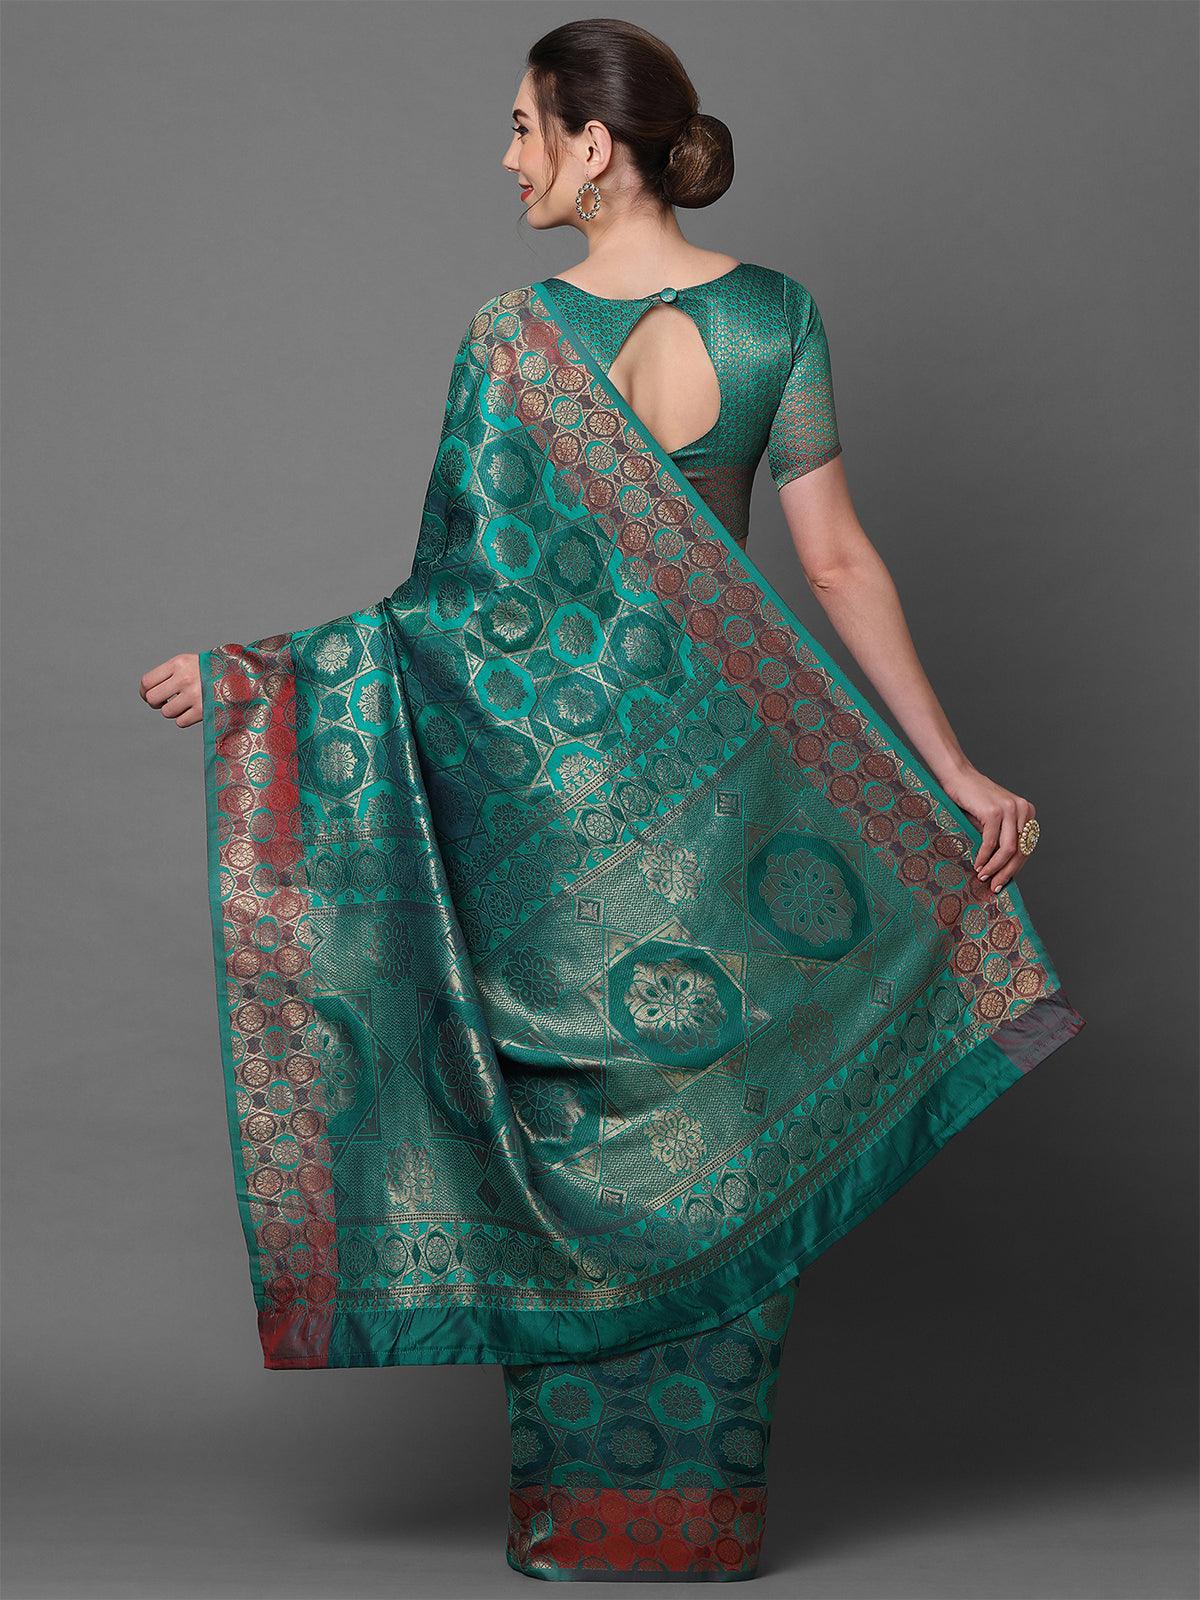 Women's Teal Blue Party Wear Pure Satin Woven Design Saree With Unstitched Blouse - Odette